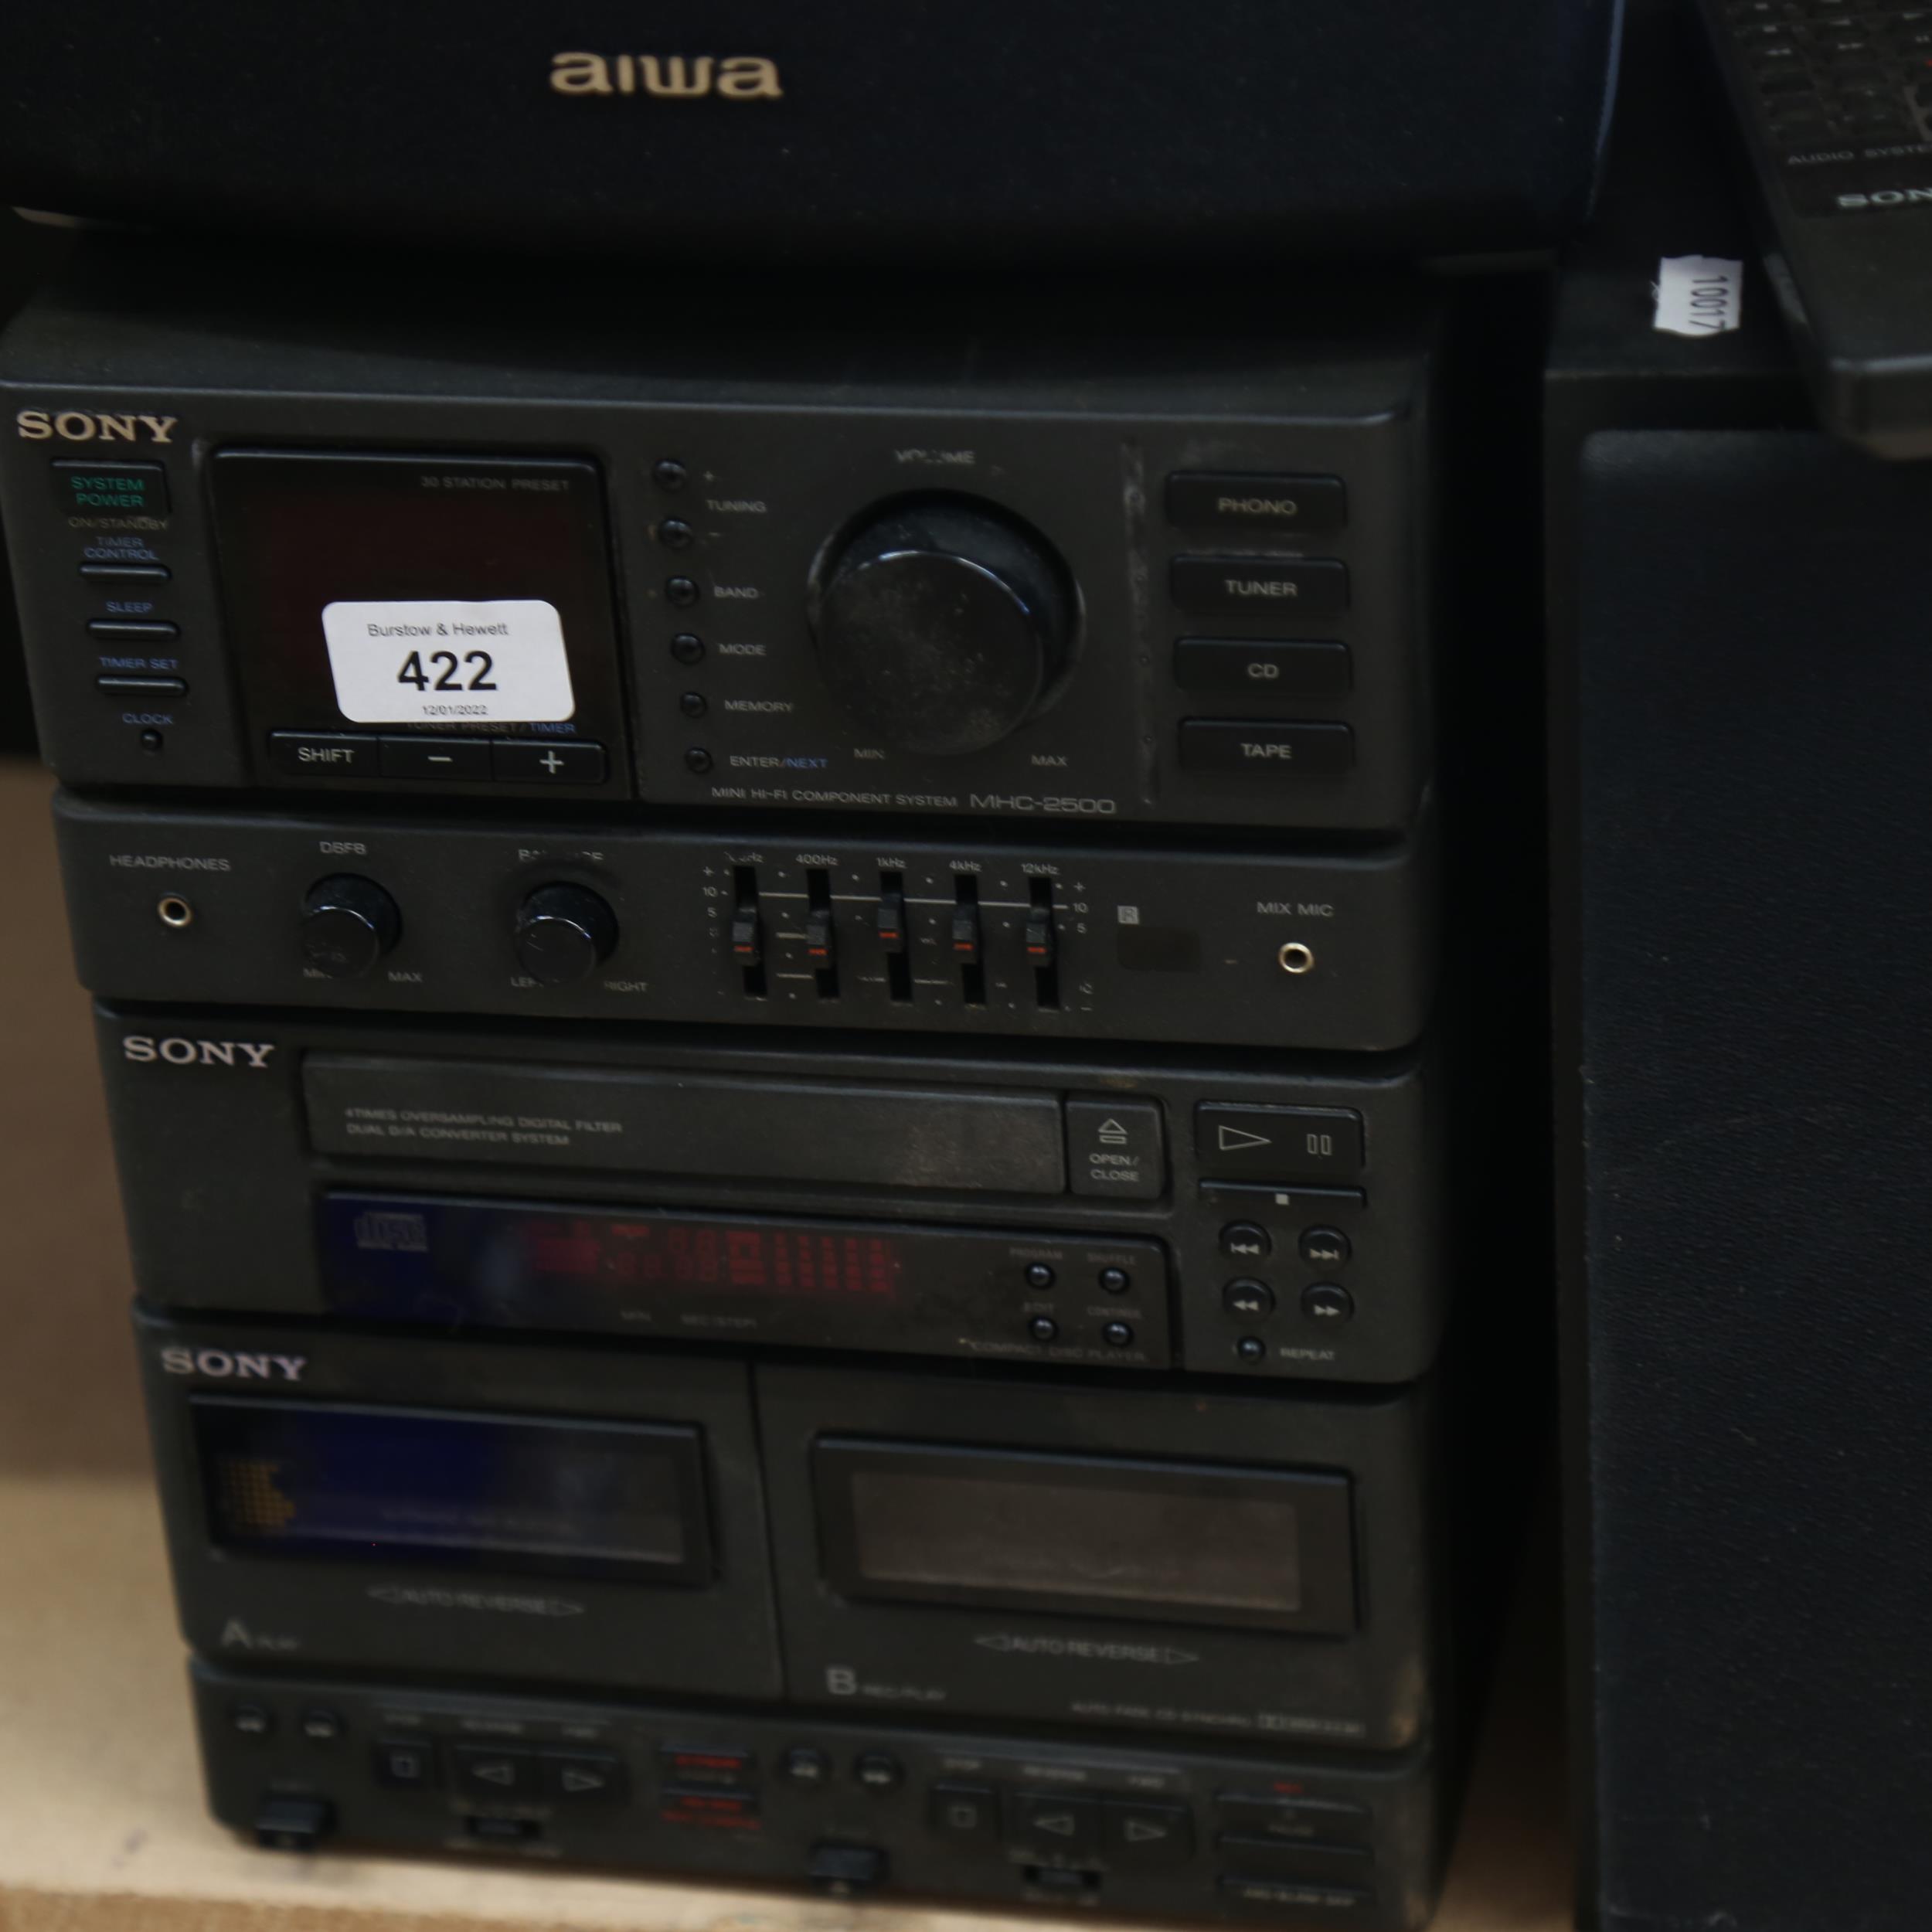 SONY - a Vintage stacking Hi-Fi system, a pair of bookshelf speakers, and Aiwa centre speaker - Image 2 of 2